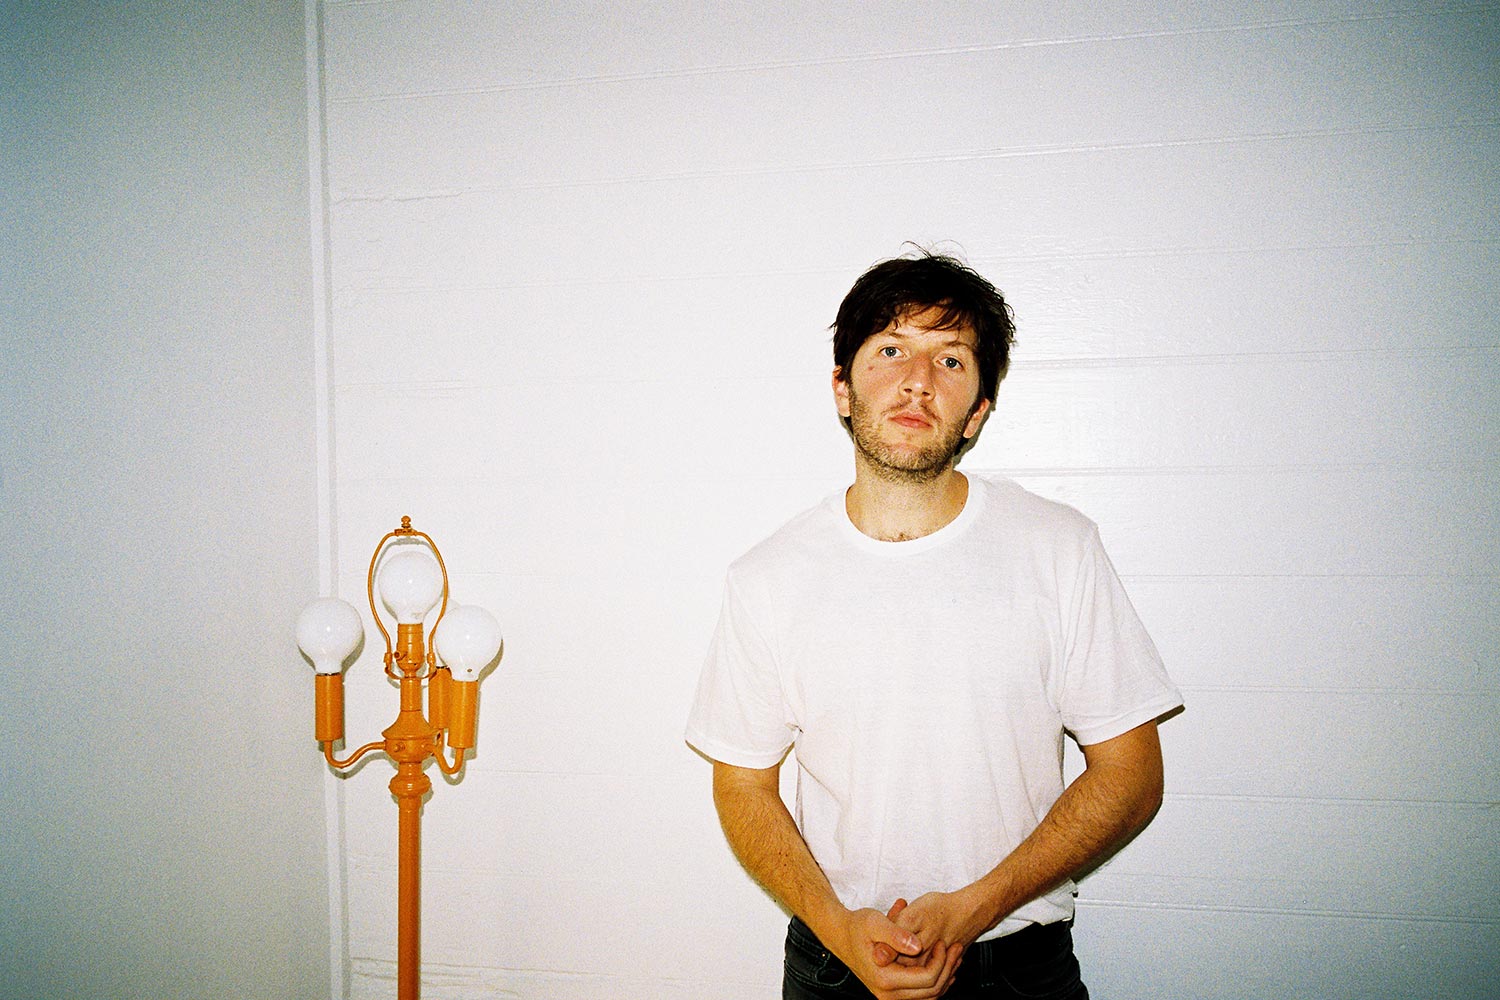 Drew Besking wearing a white t-shirt standing next to a gold lamp post